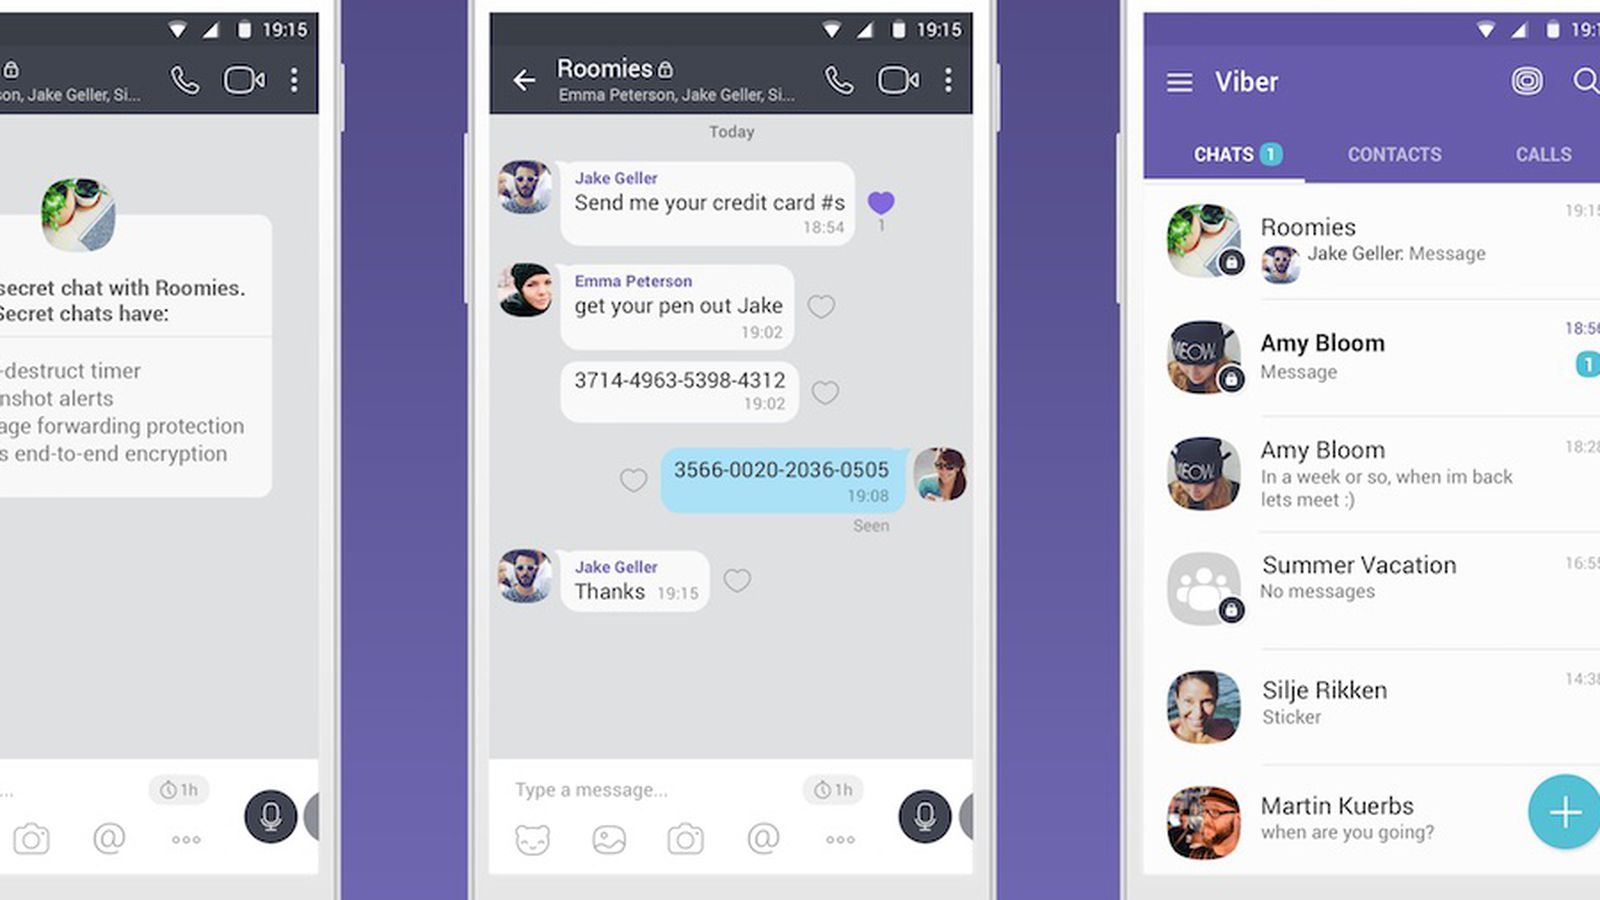 how to download viber on mac